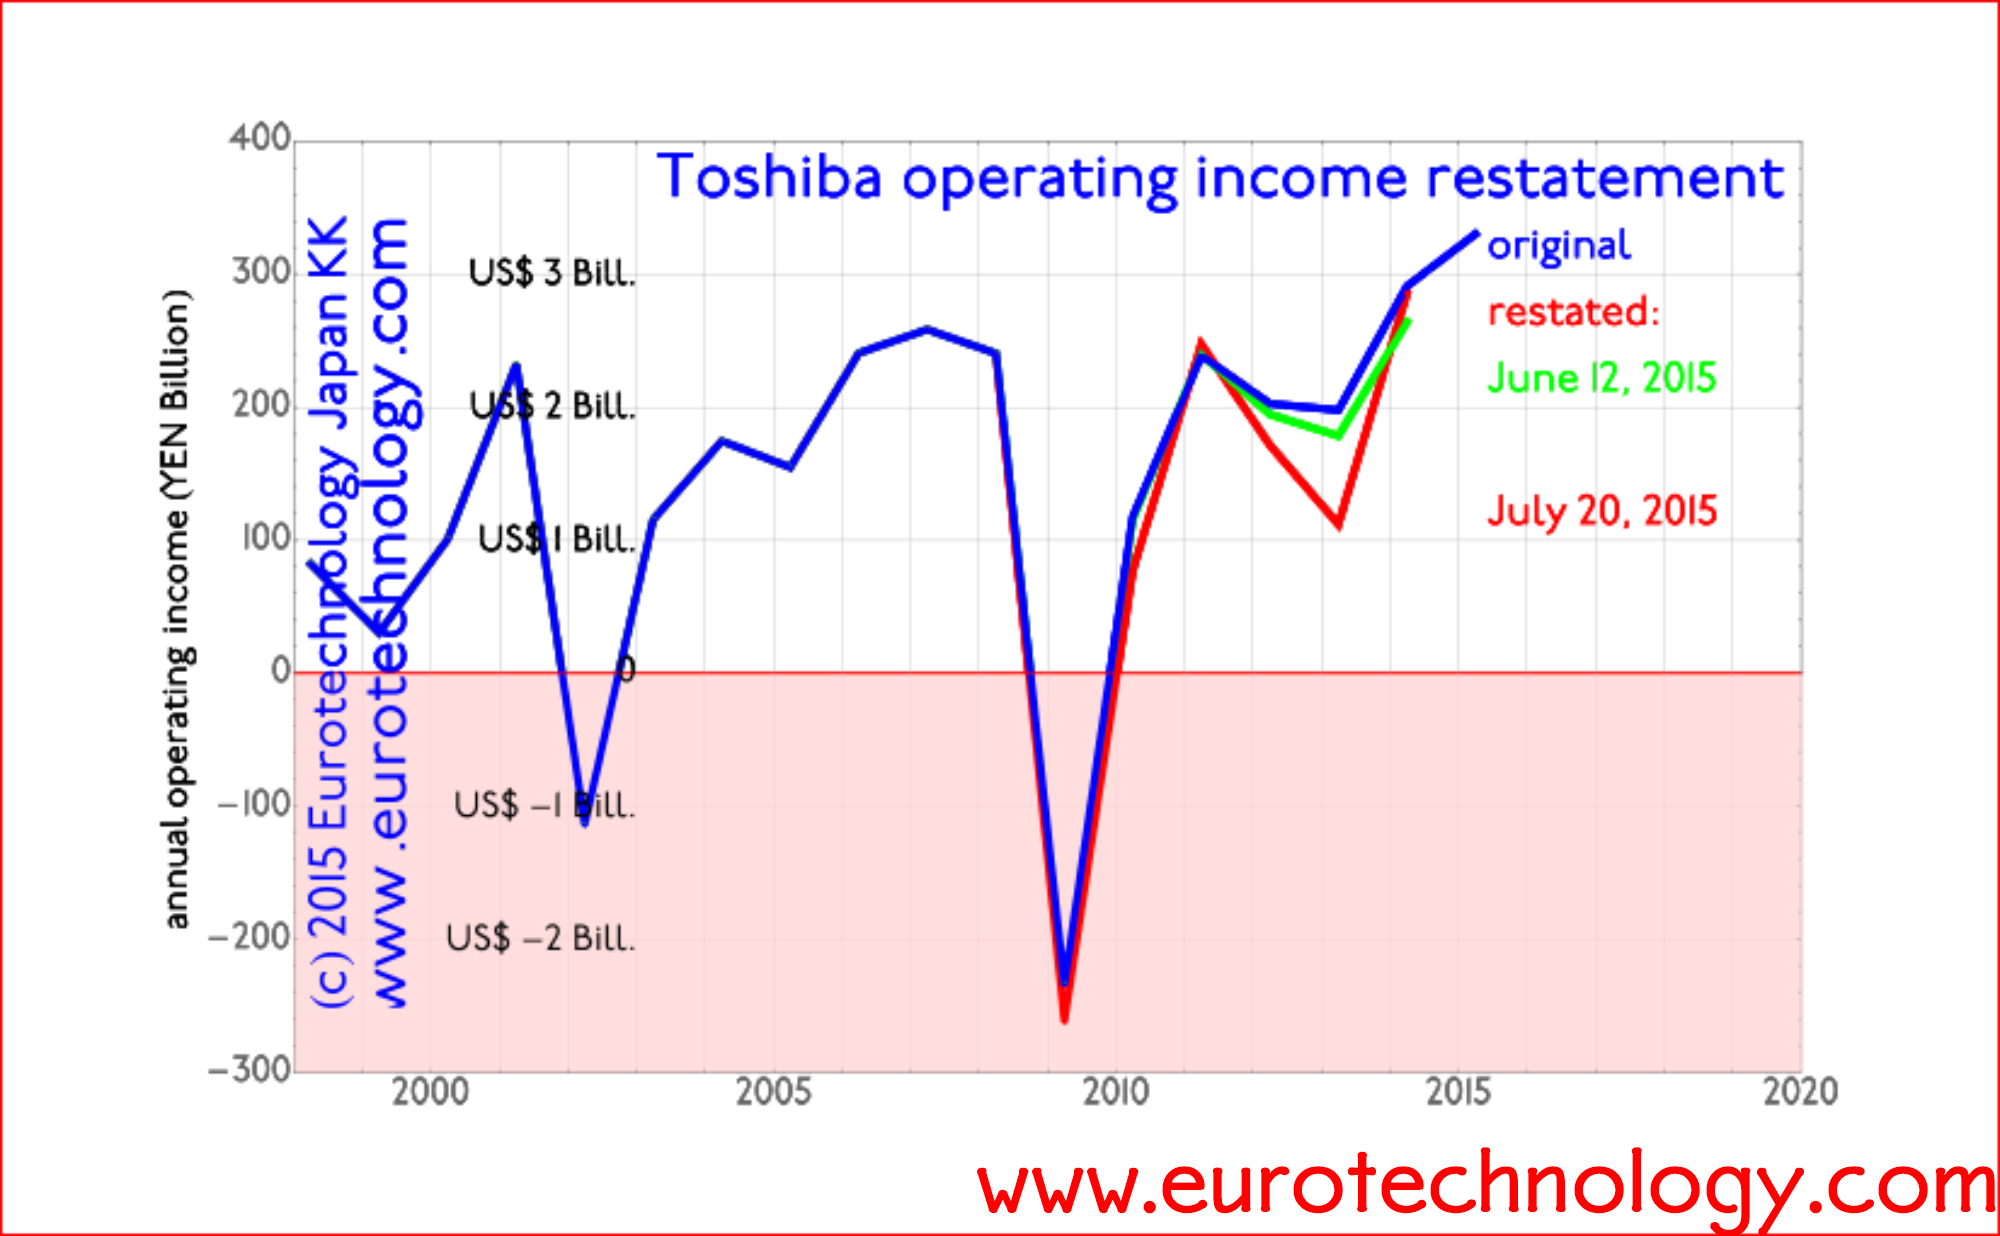 Toshiba income restatement: corresponds to one full year of average operating income